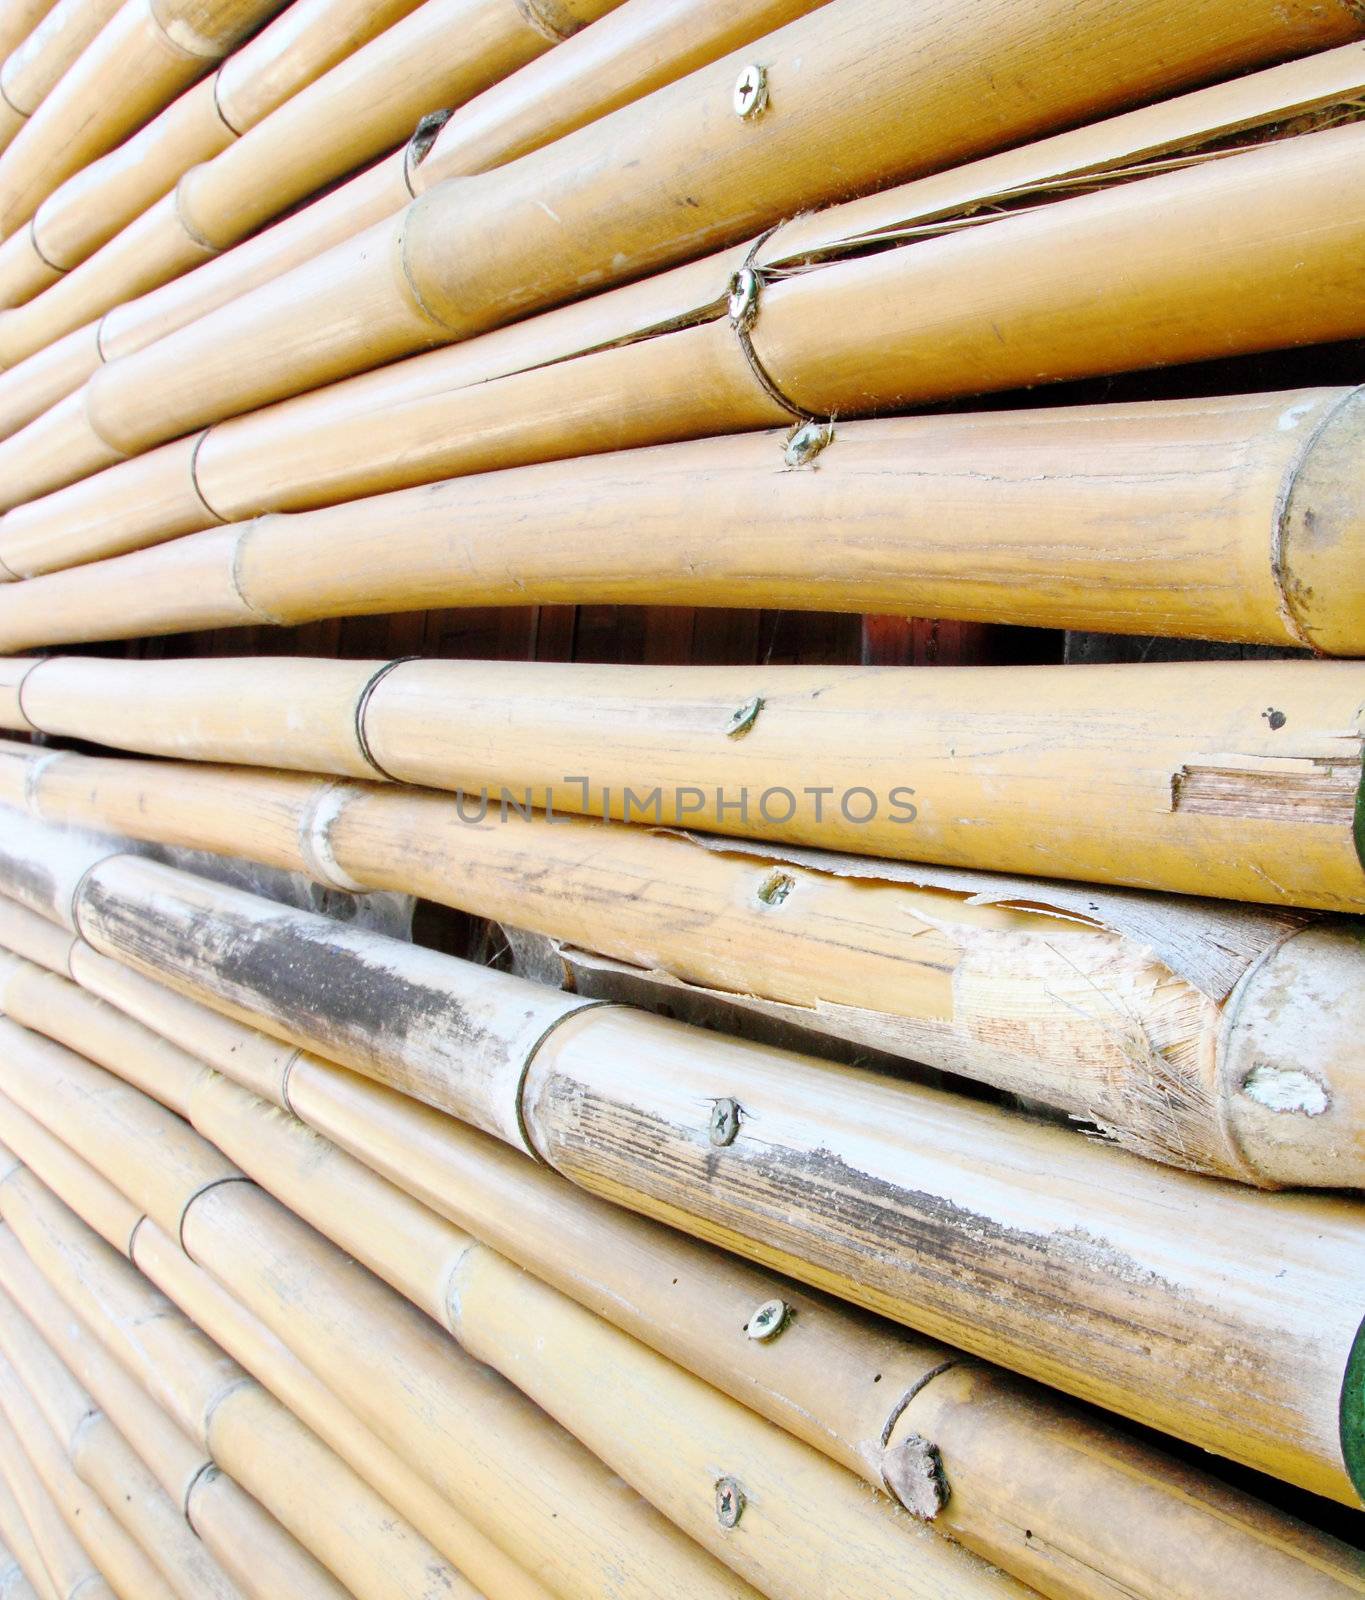 bamboo fence texture